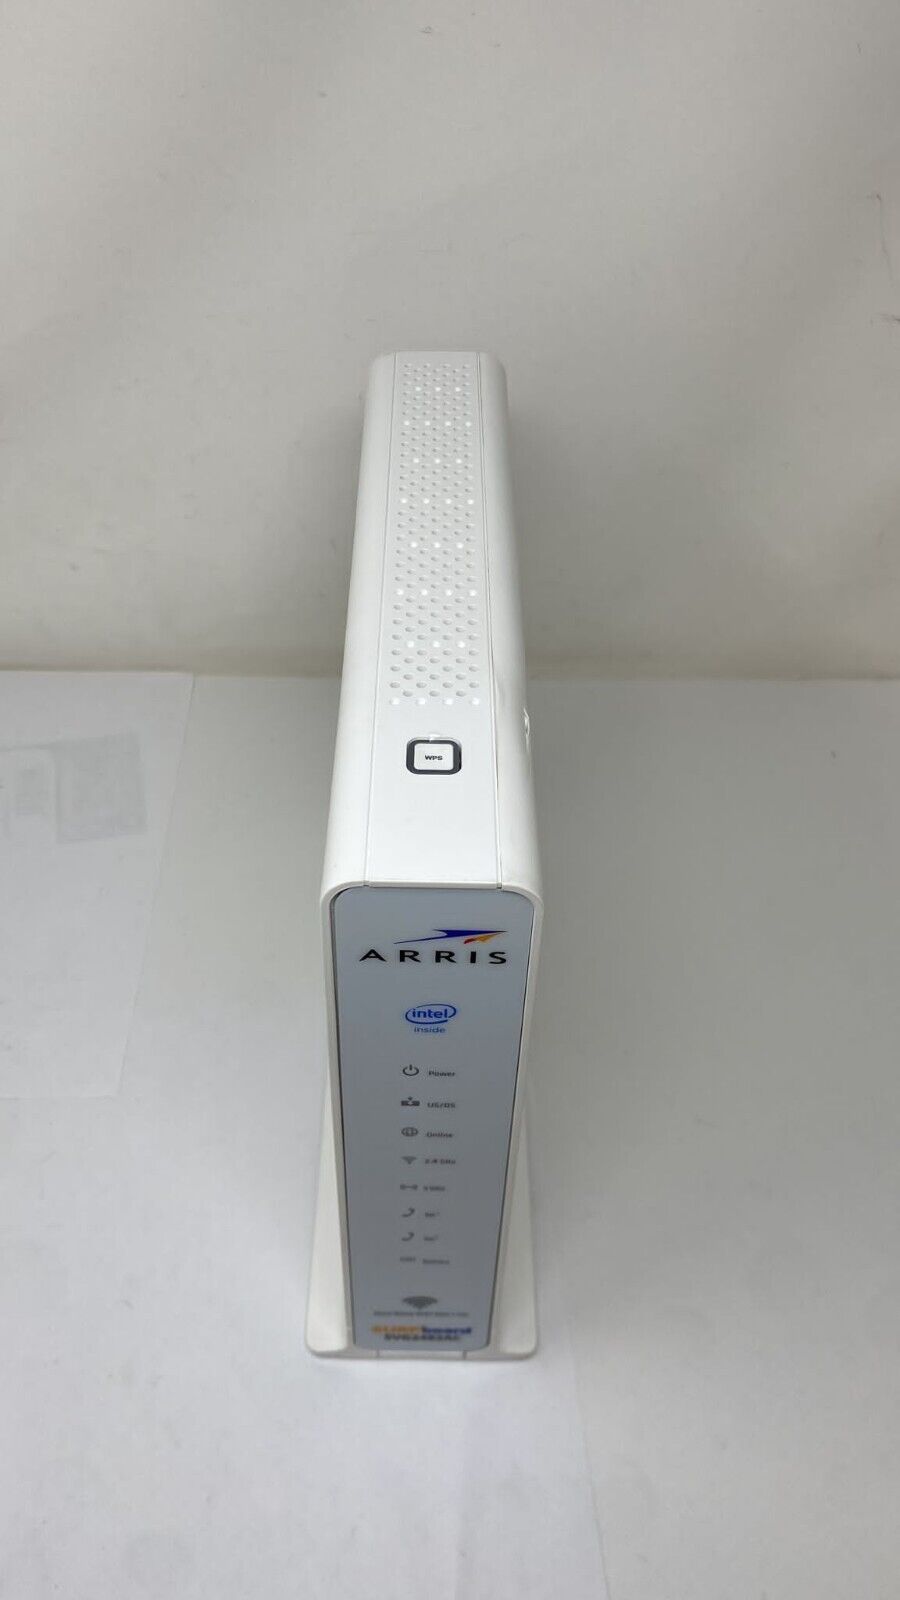 Arris Surfboard SVG2482AC Cable Modem Router 3-in-1 WiFi Internet DOCSIS 3.0